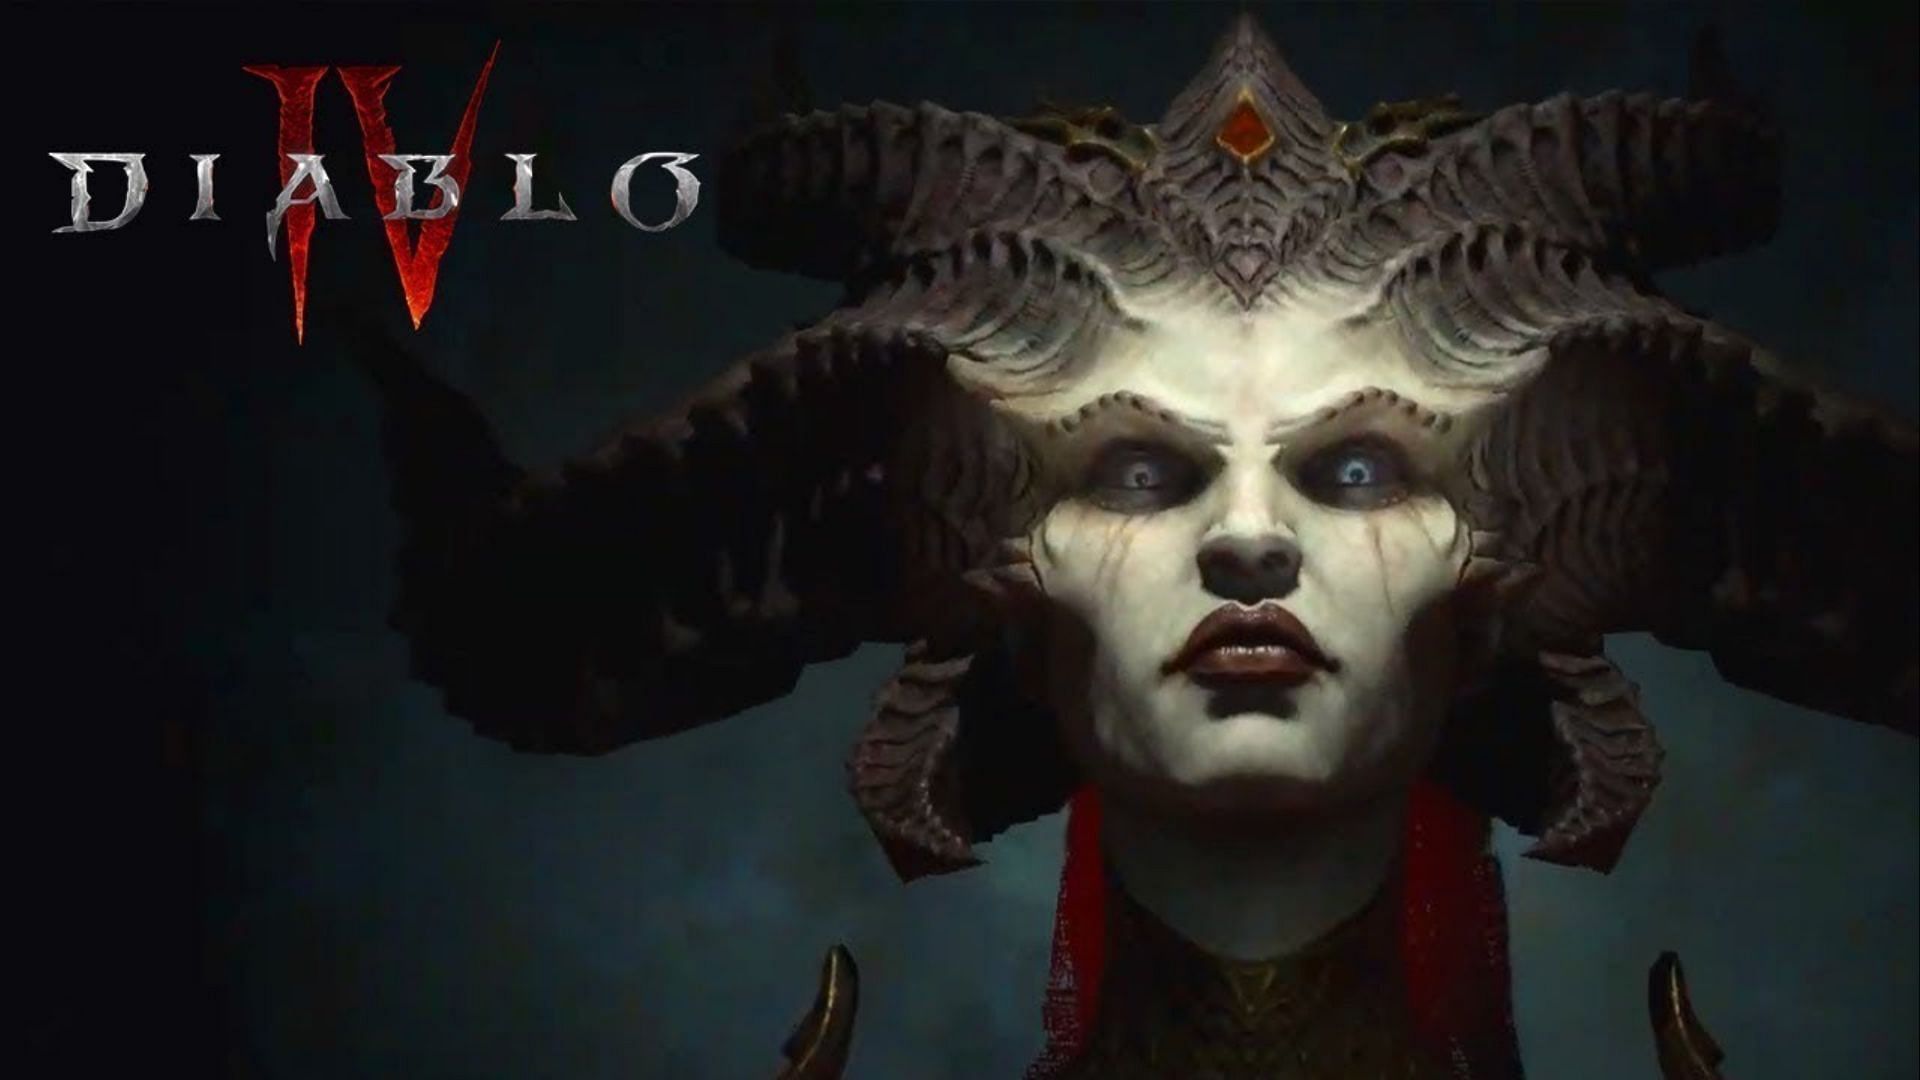 Some interesting information has come to light about a potential sixth class in Diablo 4.